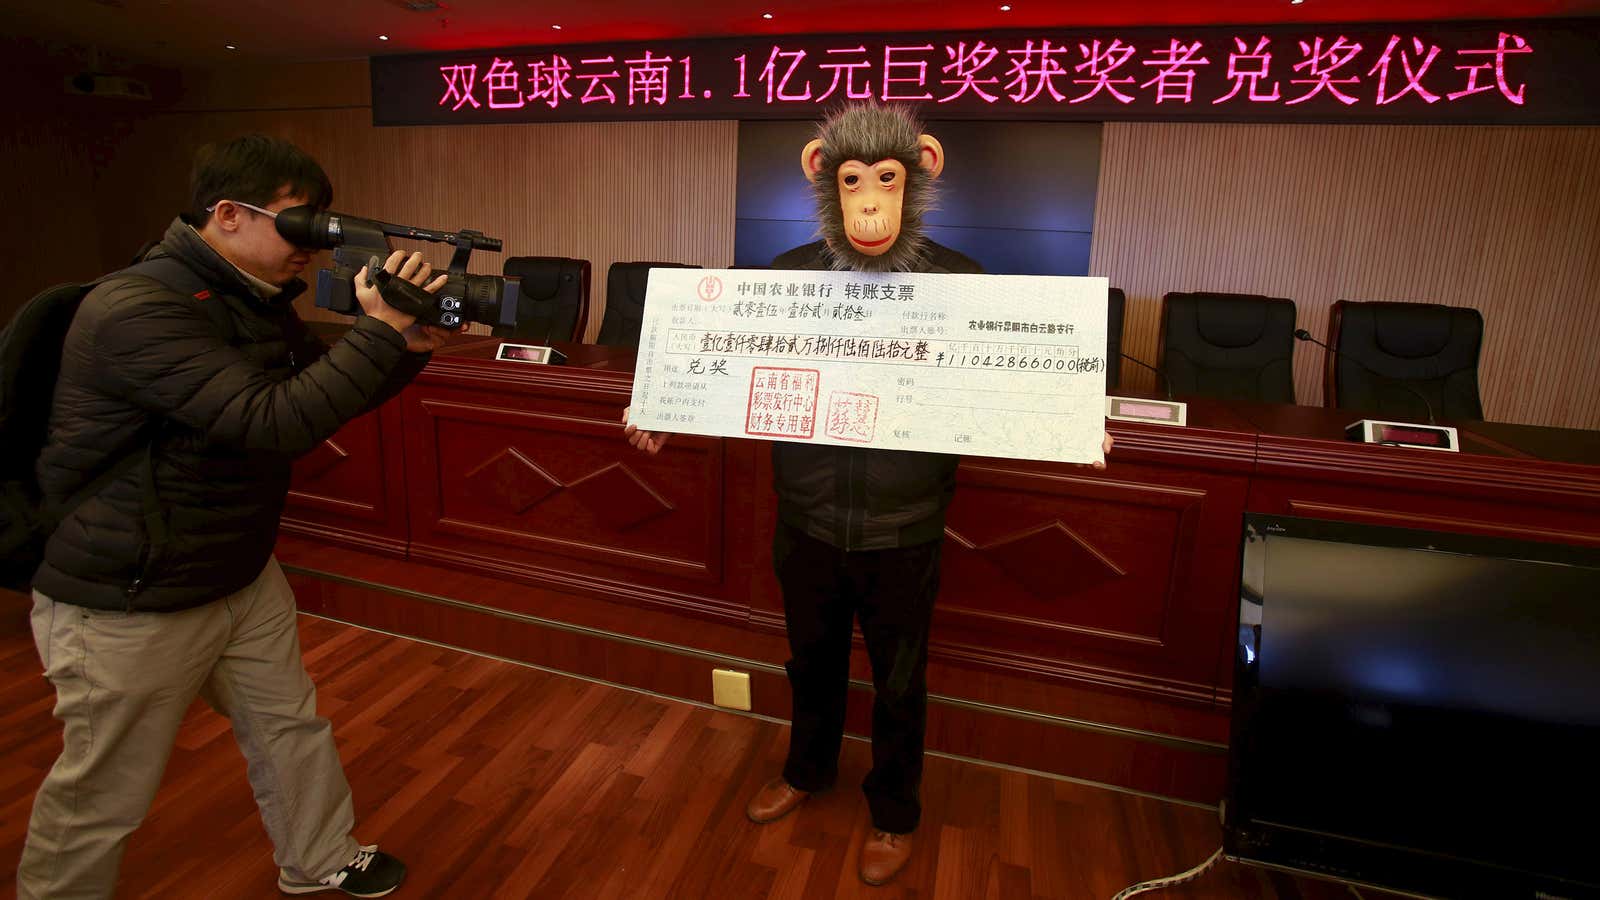 The winner of a 110 million yuan ($17 million) jackpot in Yunnan province, China, didn’t want to be identified.